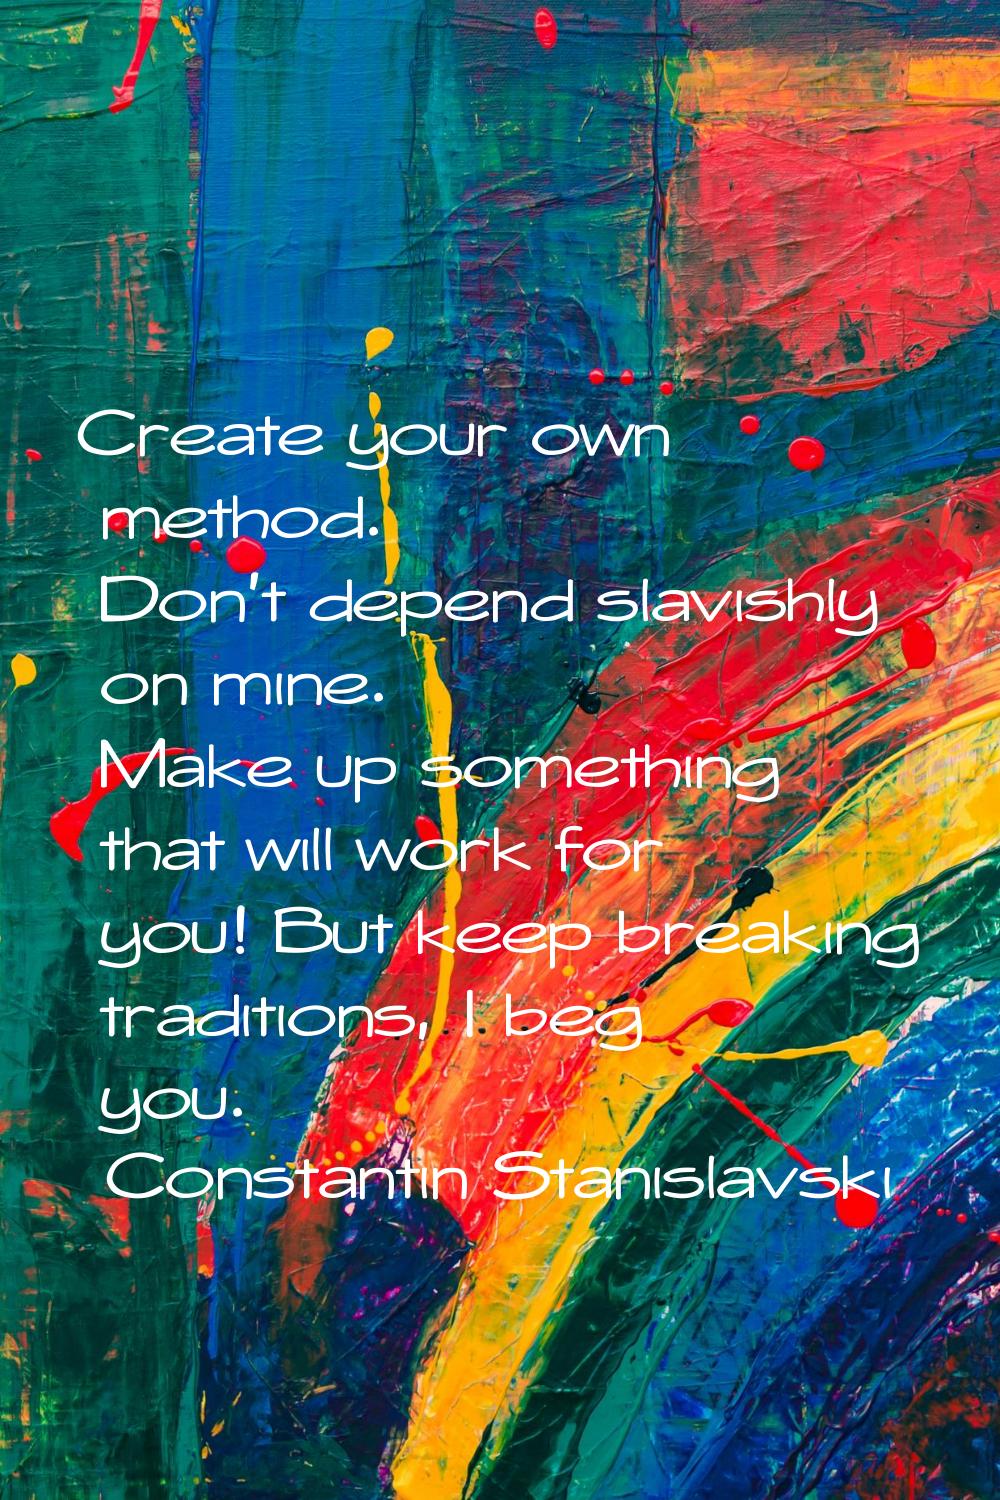 Create your own method. Don't depend slavishly on mine. Make up something that will work for you! B